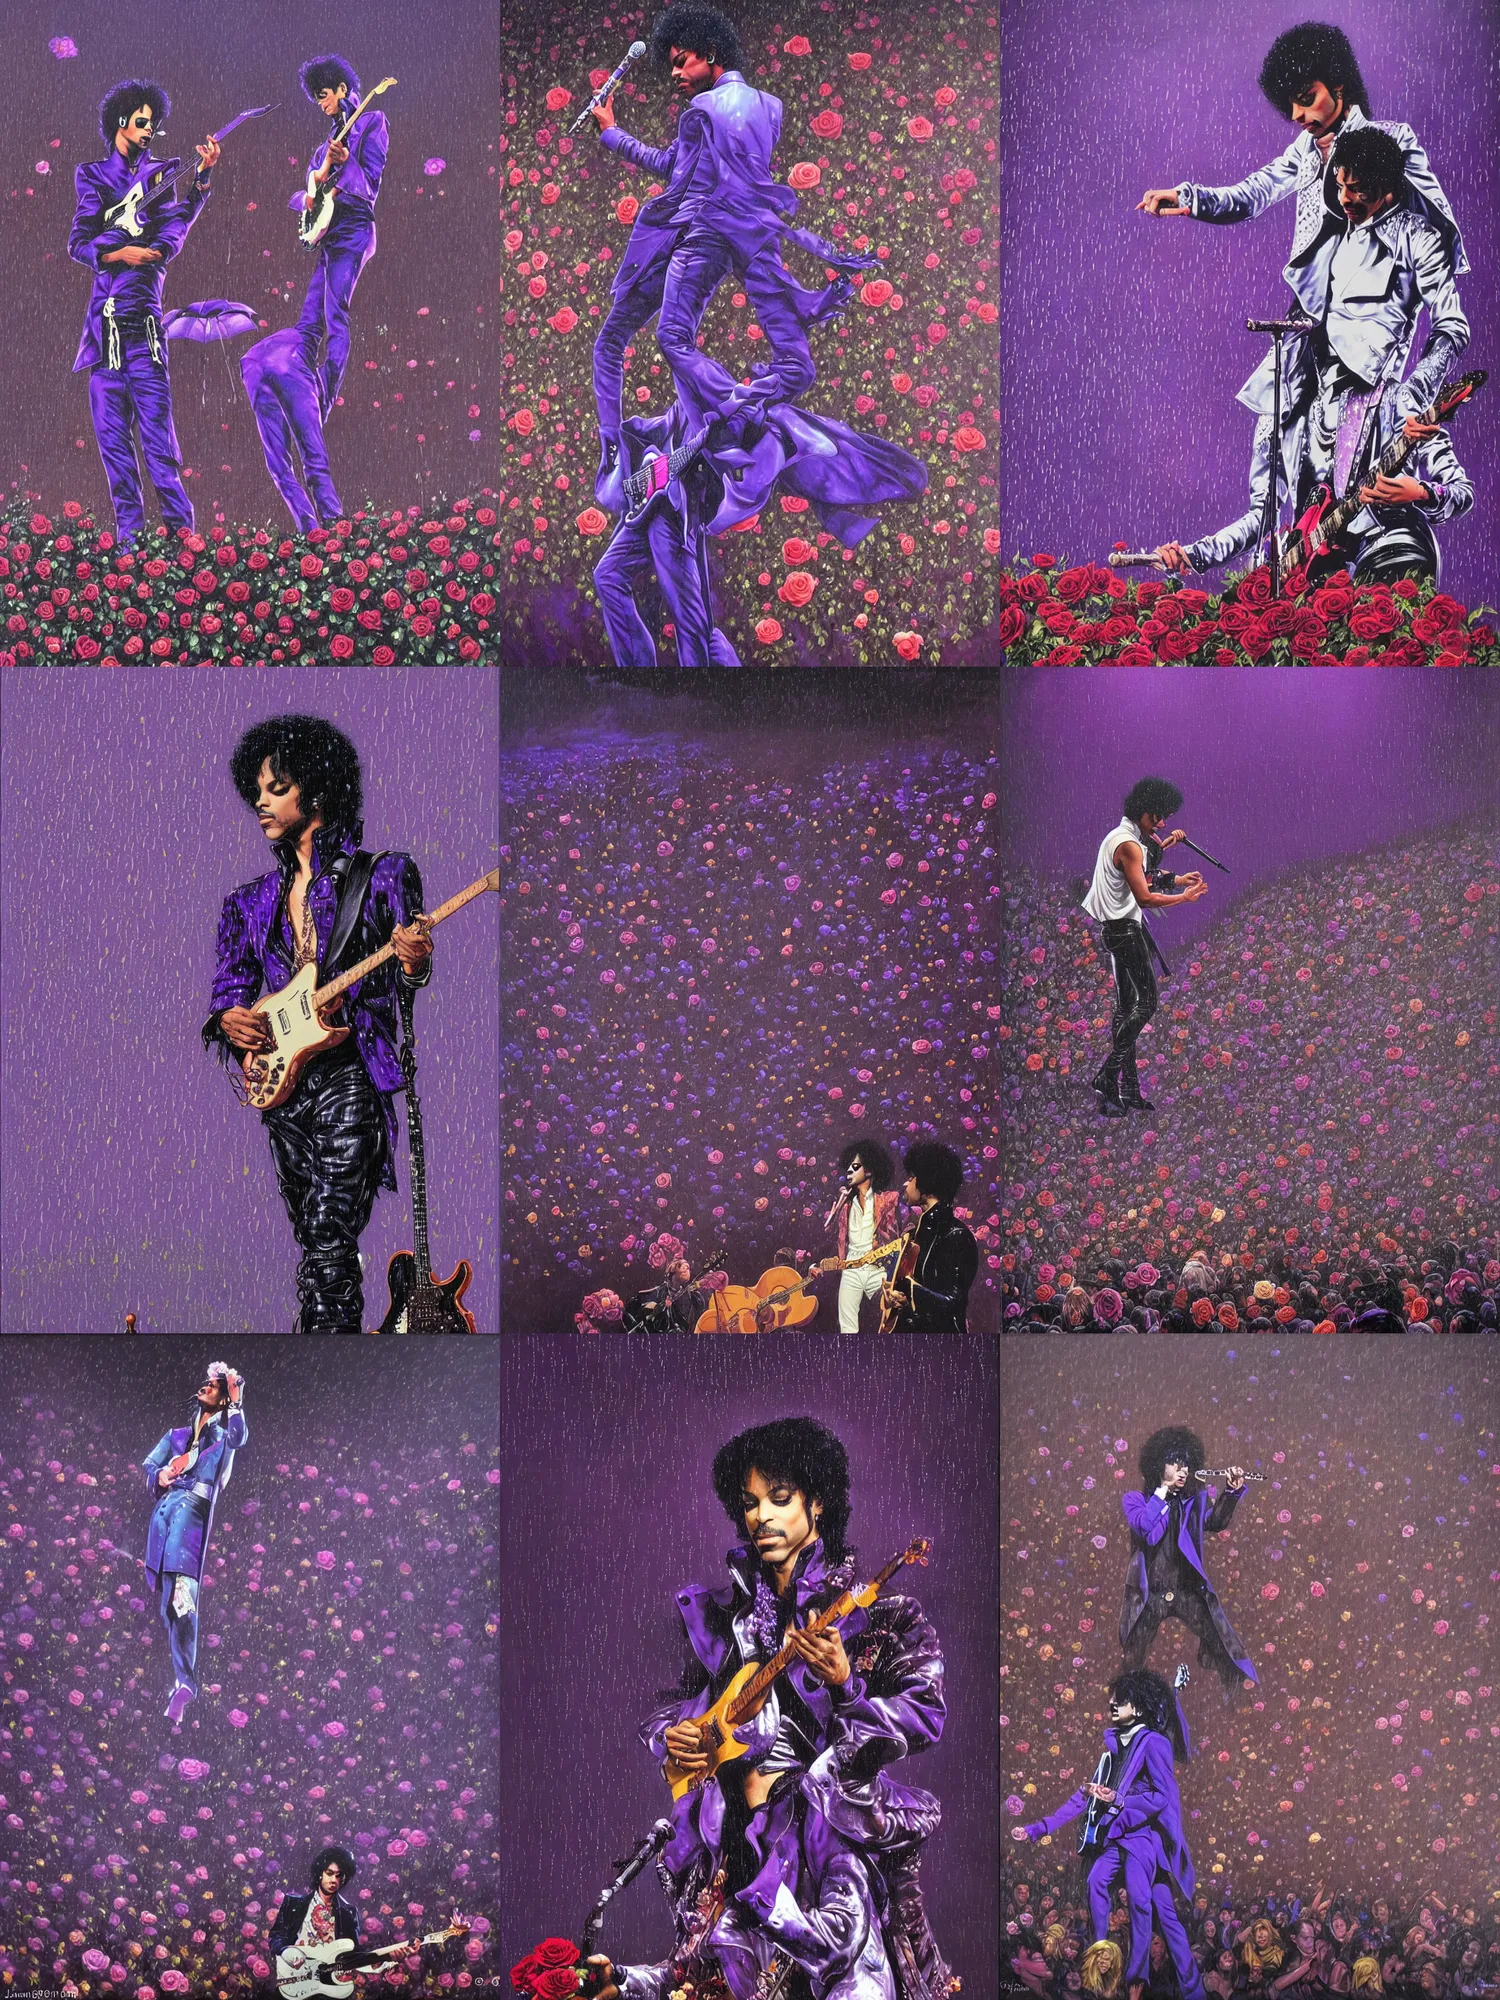 Prompt: prince playing purple rain to a very large audience in the rain, photorealistic painting by james jean and jean giraud, low light, beautiful atmosphere with a very large crowd being emotionally involved, very rainy, some roses and floral decoration on stage, ornamental